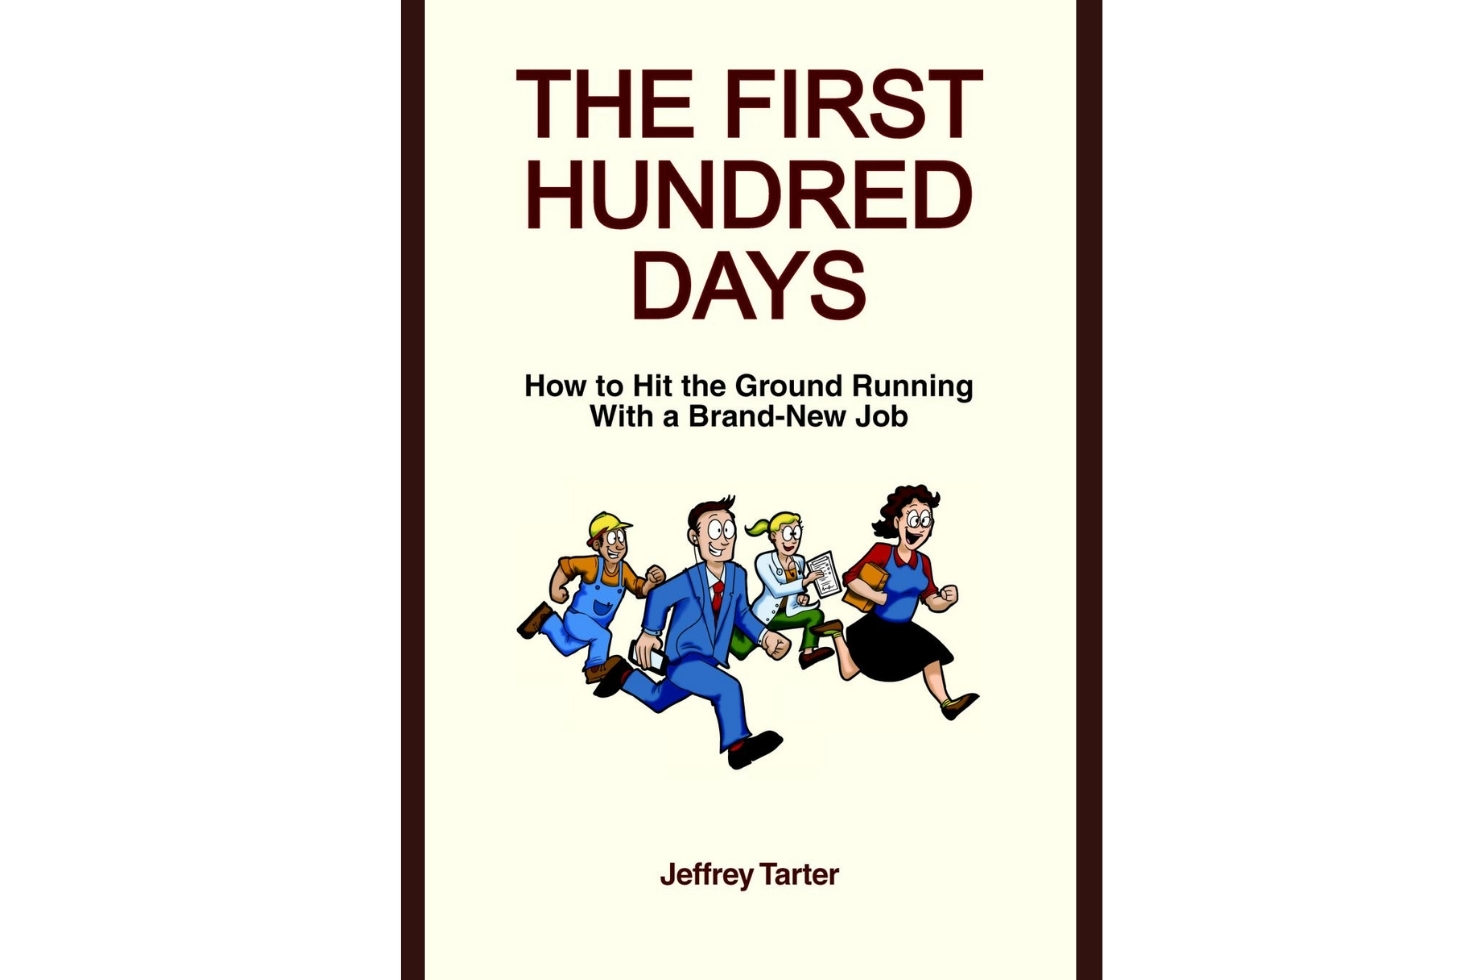 "The First Hundred Days" book cover